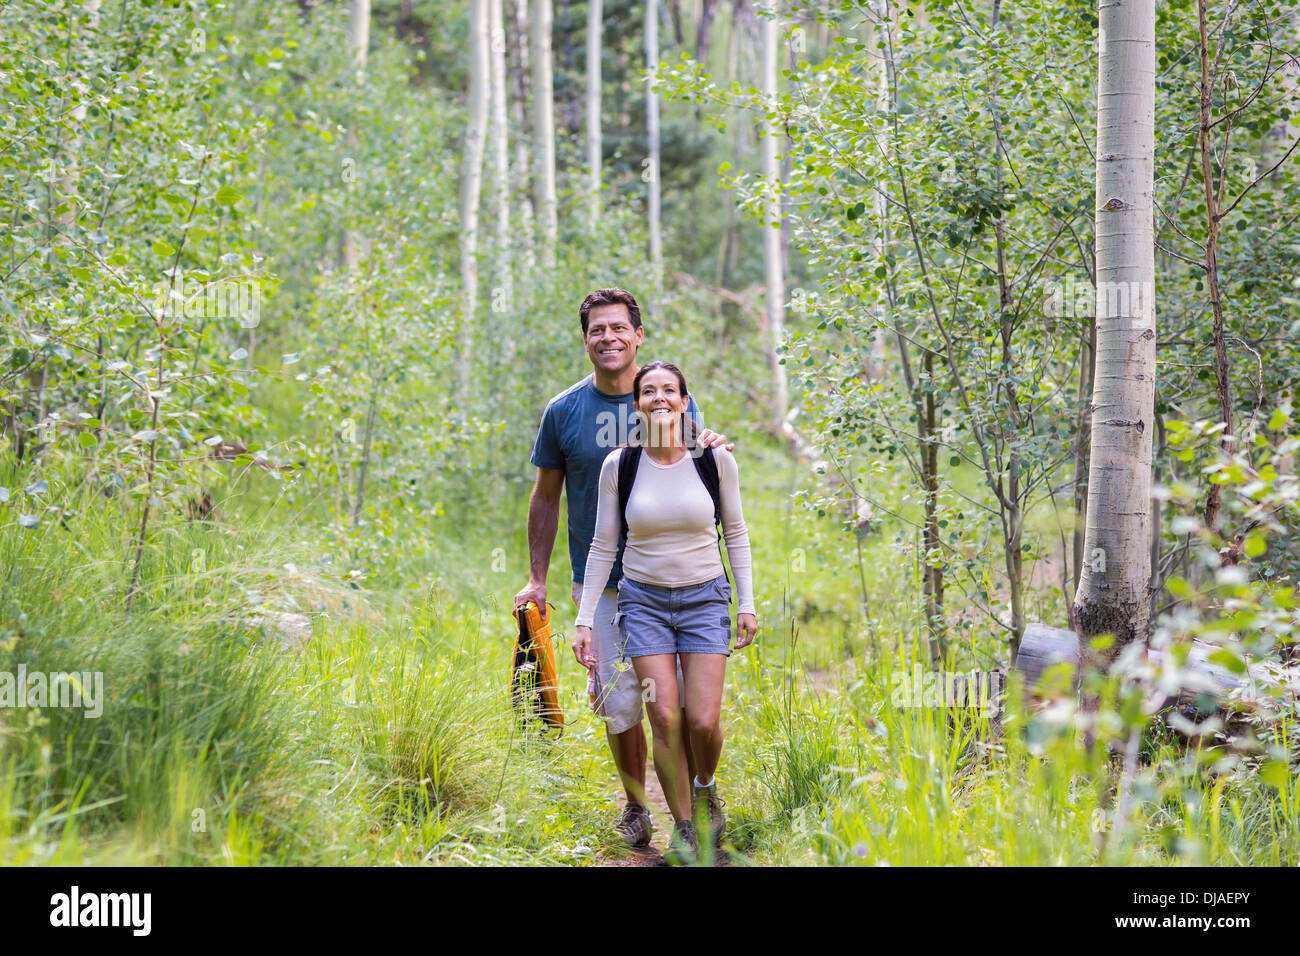 Couple walking together in forest Stock Photo